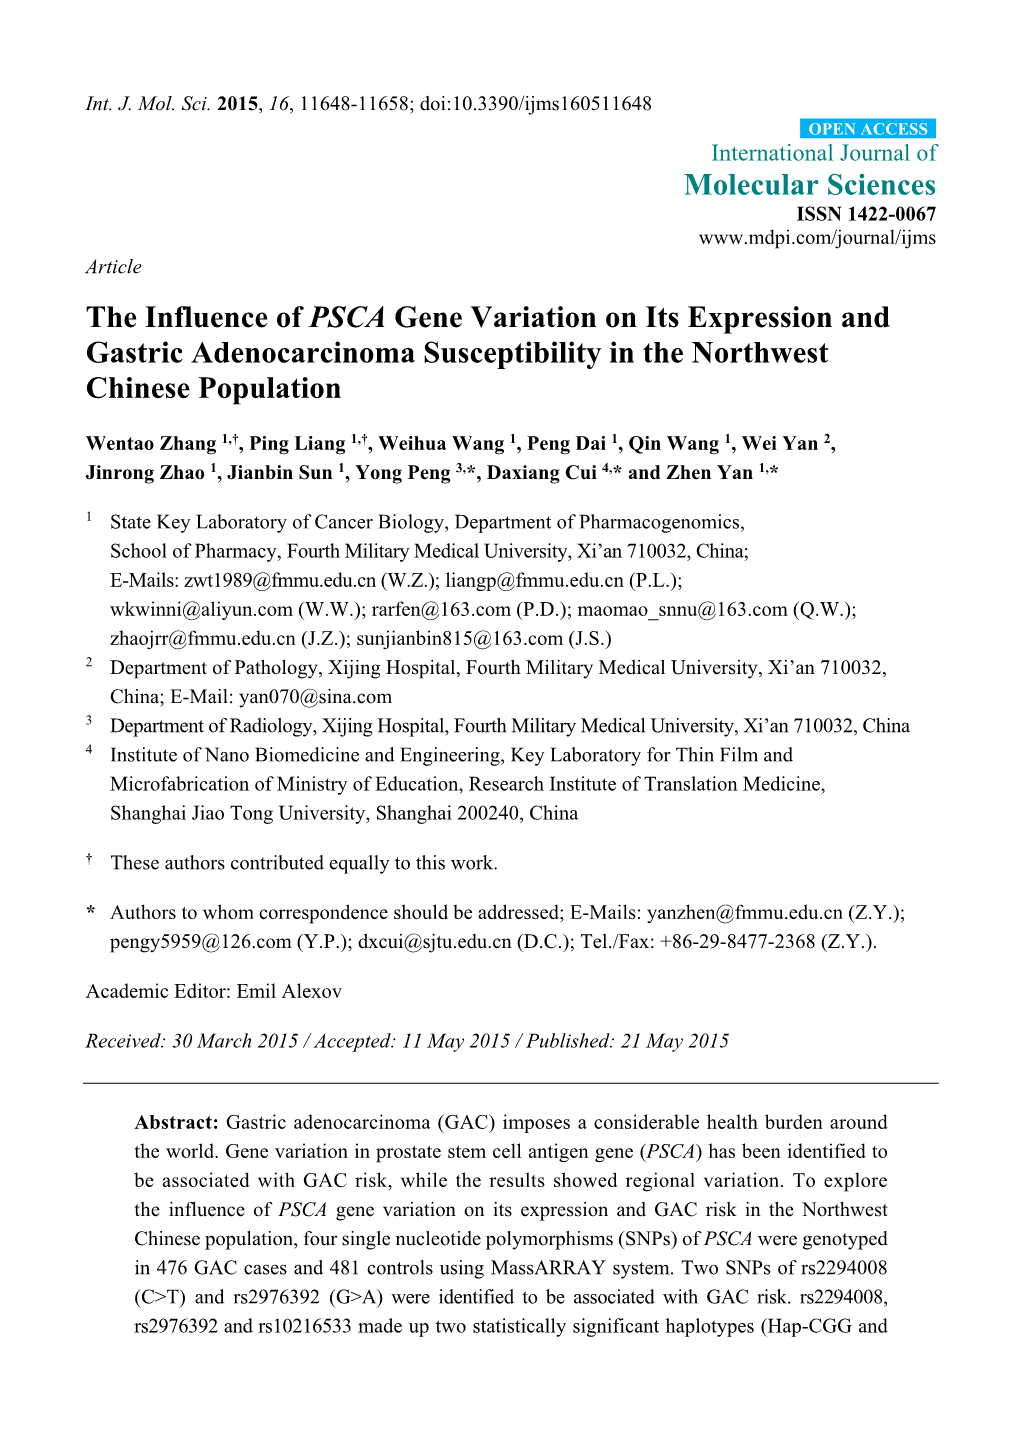 The Influence of PSCA Gene Variation on Its Expression and Gastric Adenocarcinoma Susceptibility in the Northwest Chinese Population